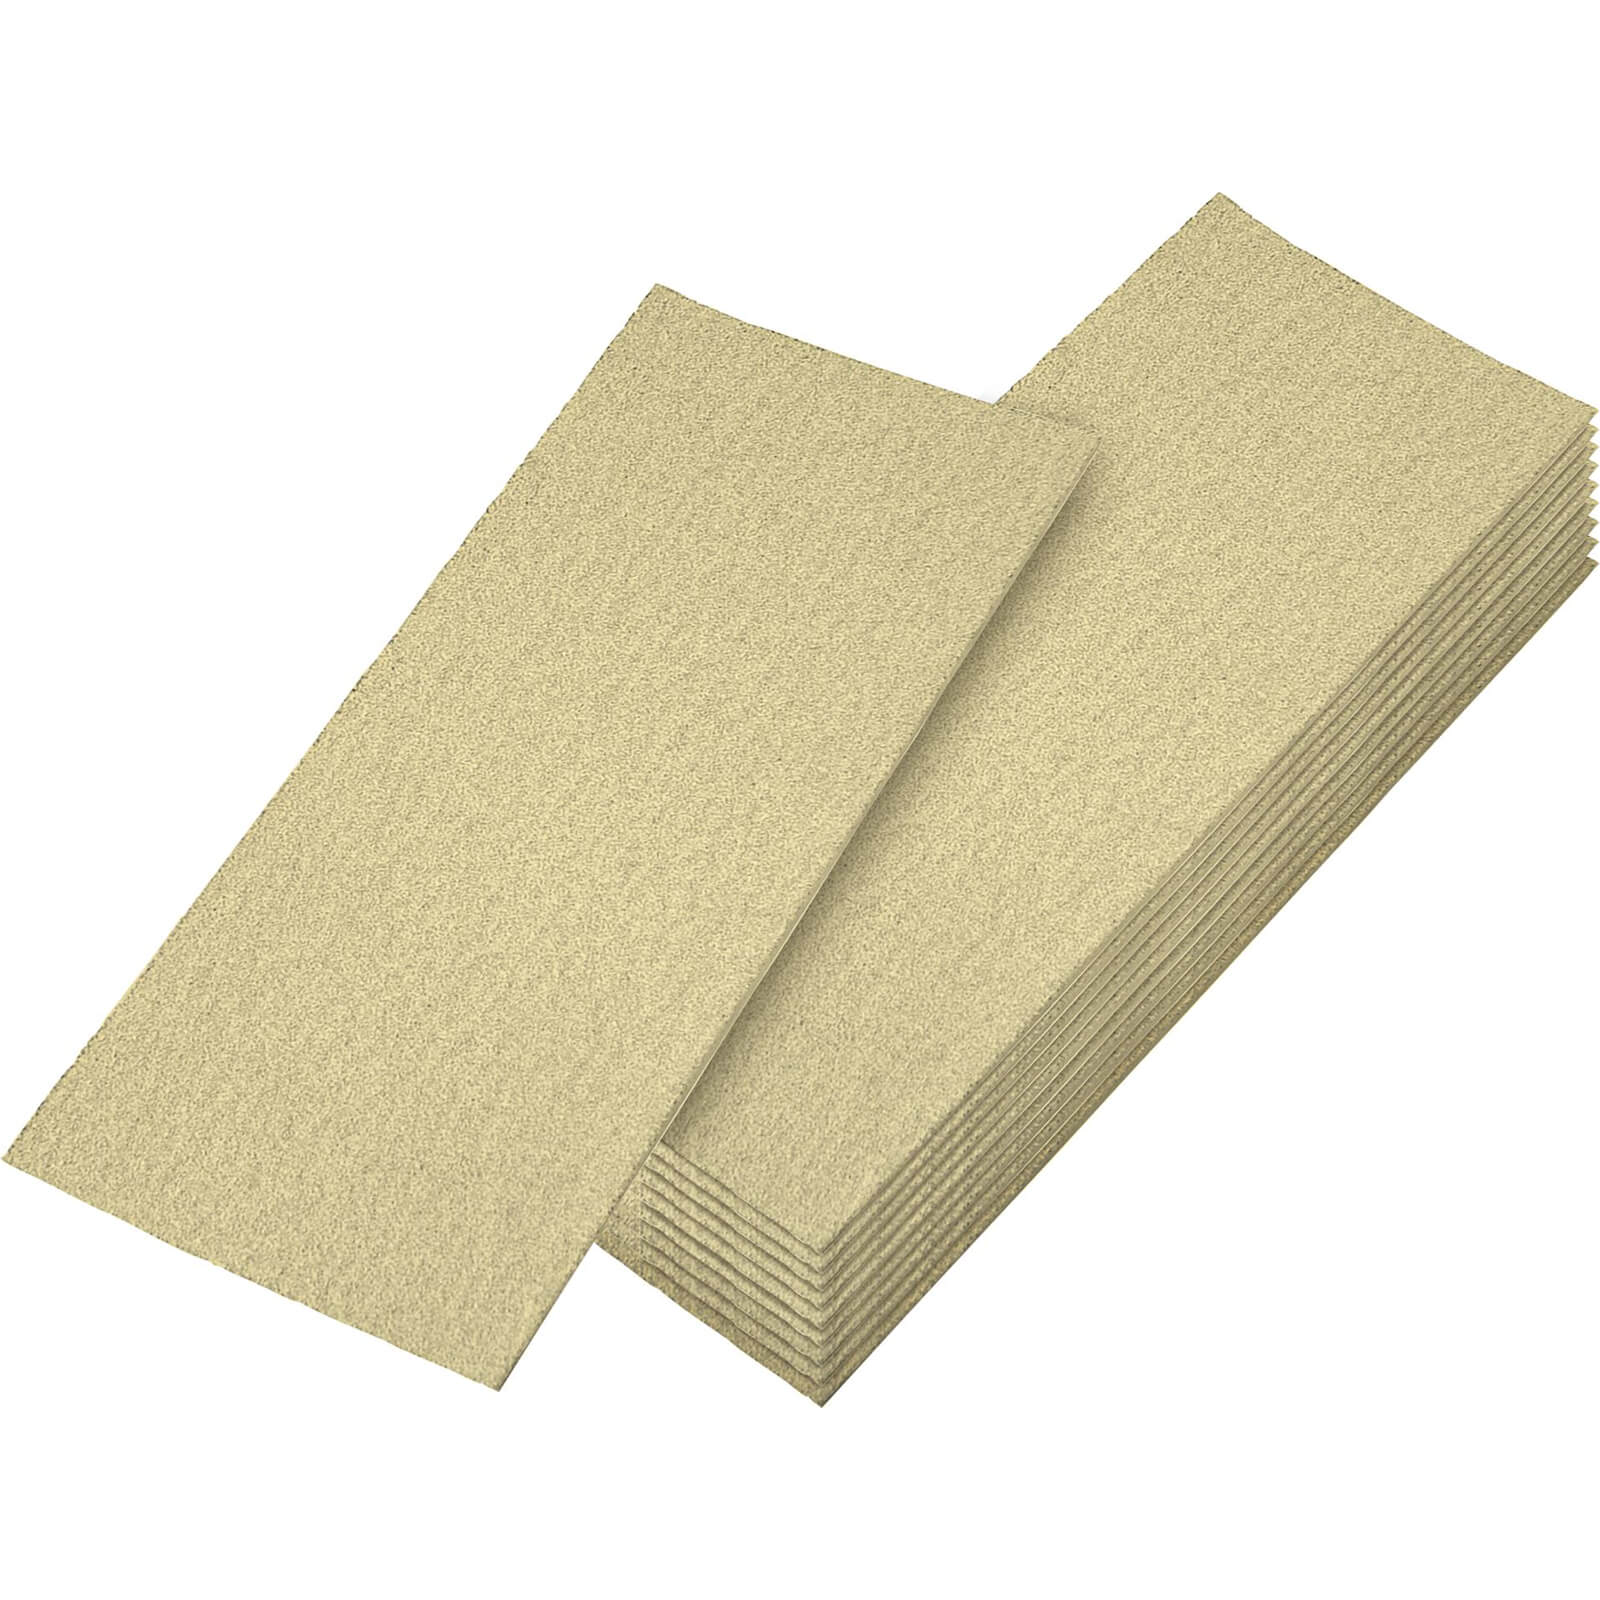 Image of Faithfull Clip On 1/2 Sanding Sheets 115mm x 280mm Coarse Pack of 5